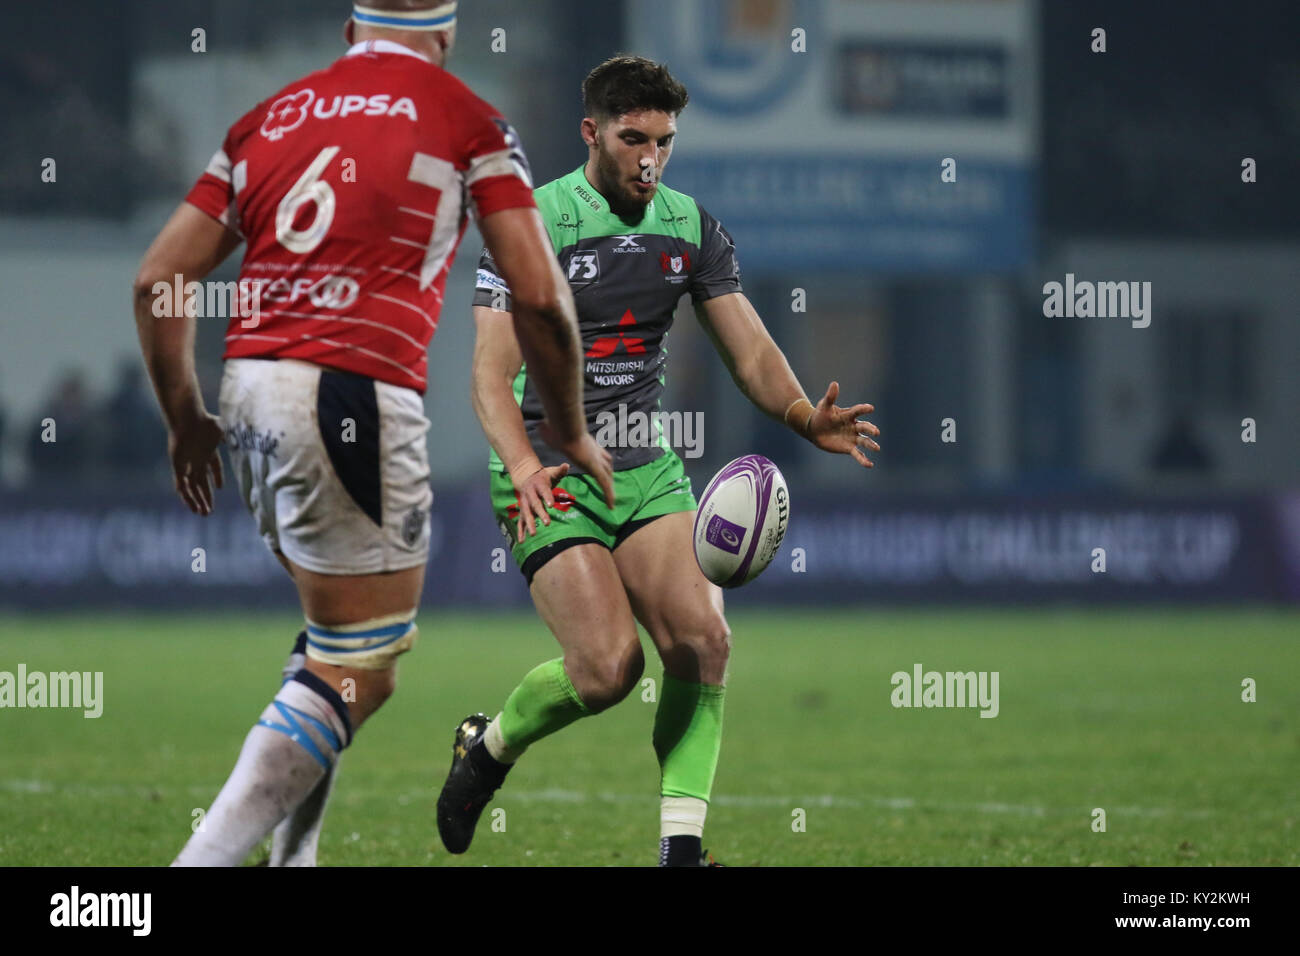 Agen, France. 12th Jan, 2018. Gloucester's during the match opposing Agen vs Gloucester in EPCR Challenge Cup 2017/2018. Credit: Sebastien Lapeyrere/Alamy Live News. Stock Photo